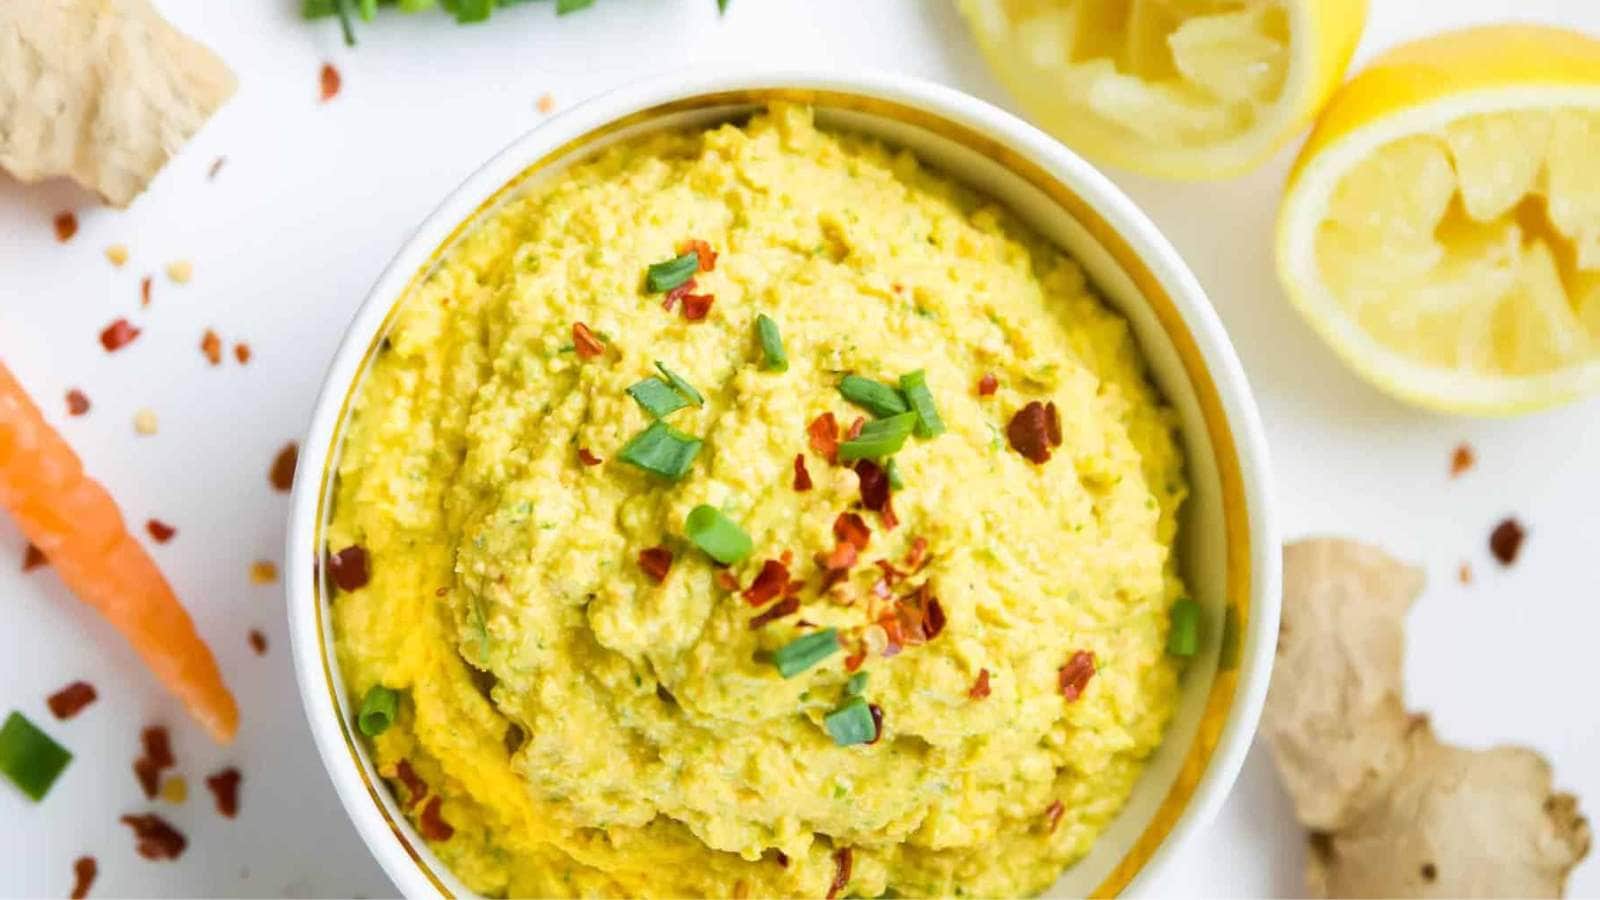 Carrot Dip With Chilis recipe by Pure And Simple Nourishment.